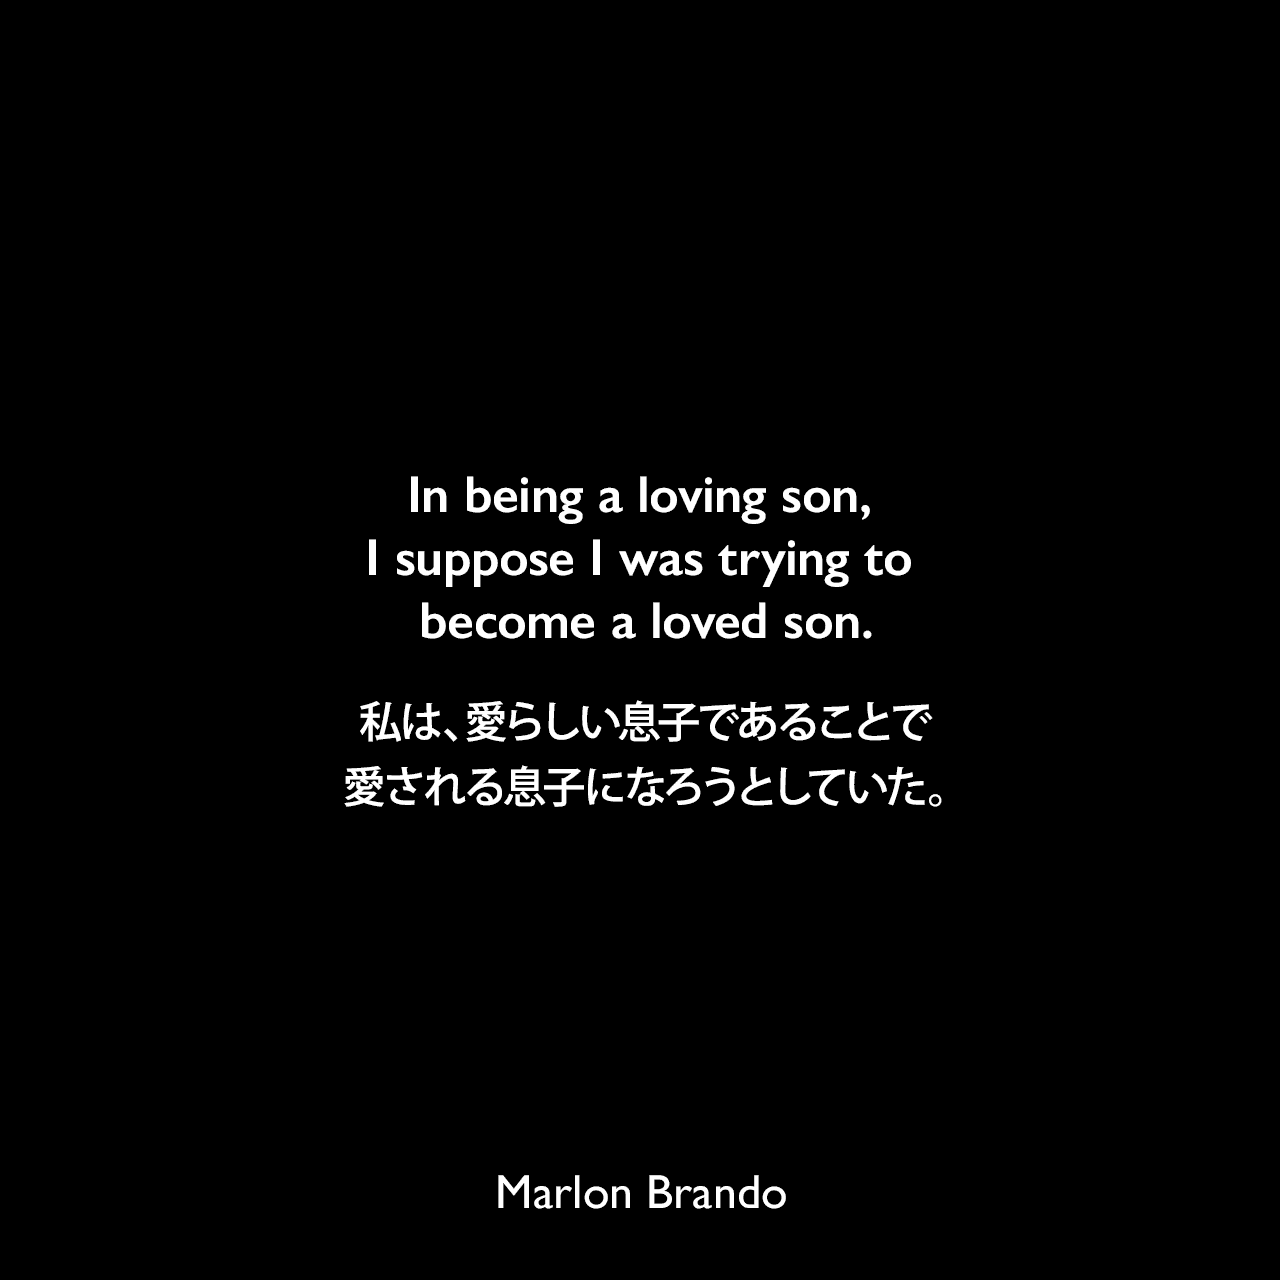 In being a loving son, I suppose I was trying to become a loved son.私は、愛らしい息子であることで、愛される息子になろうとしていた。Marlon Brando